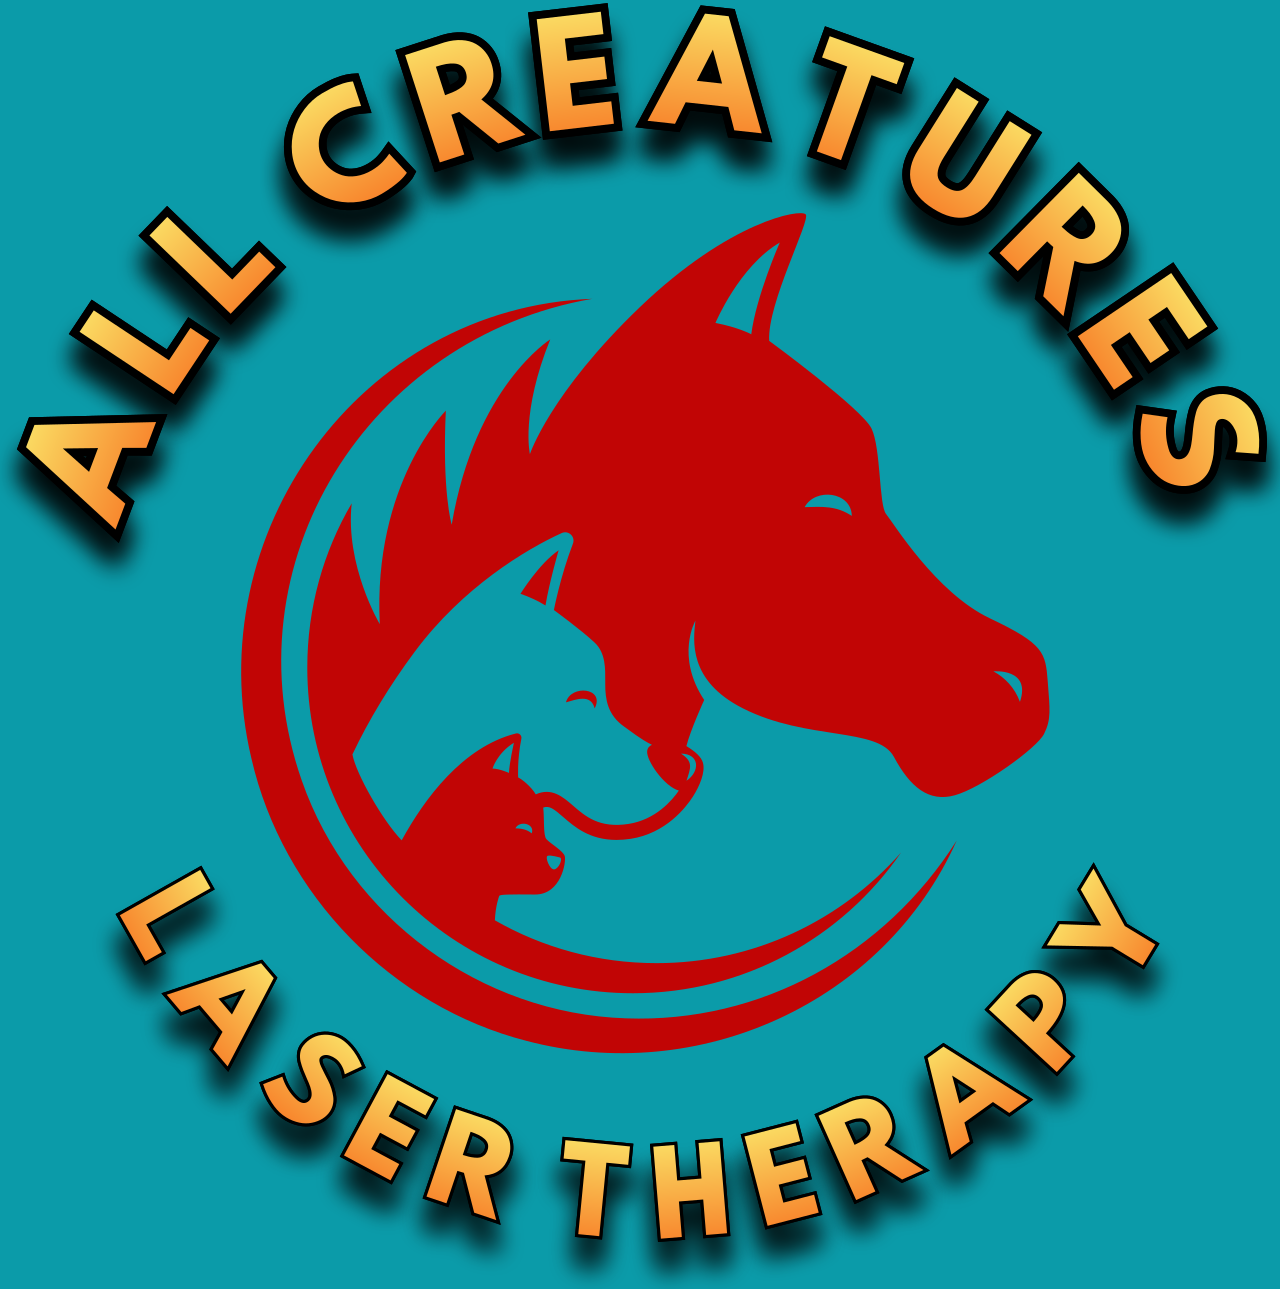 All Creatures Laser Therapy